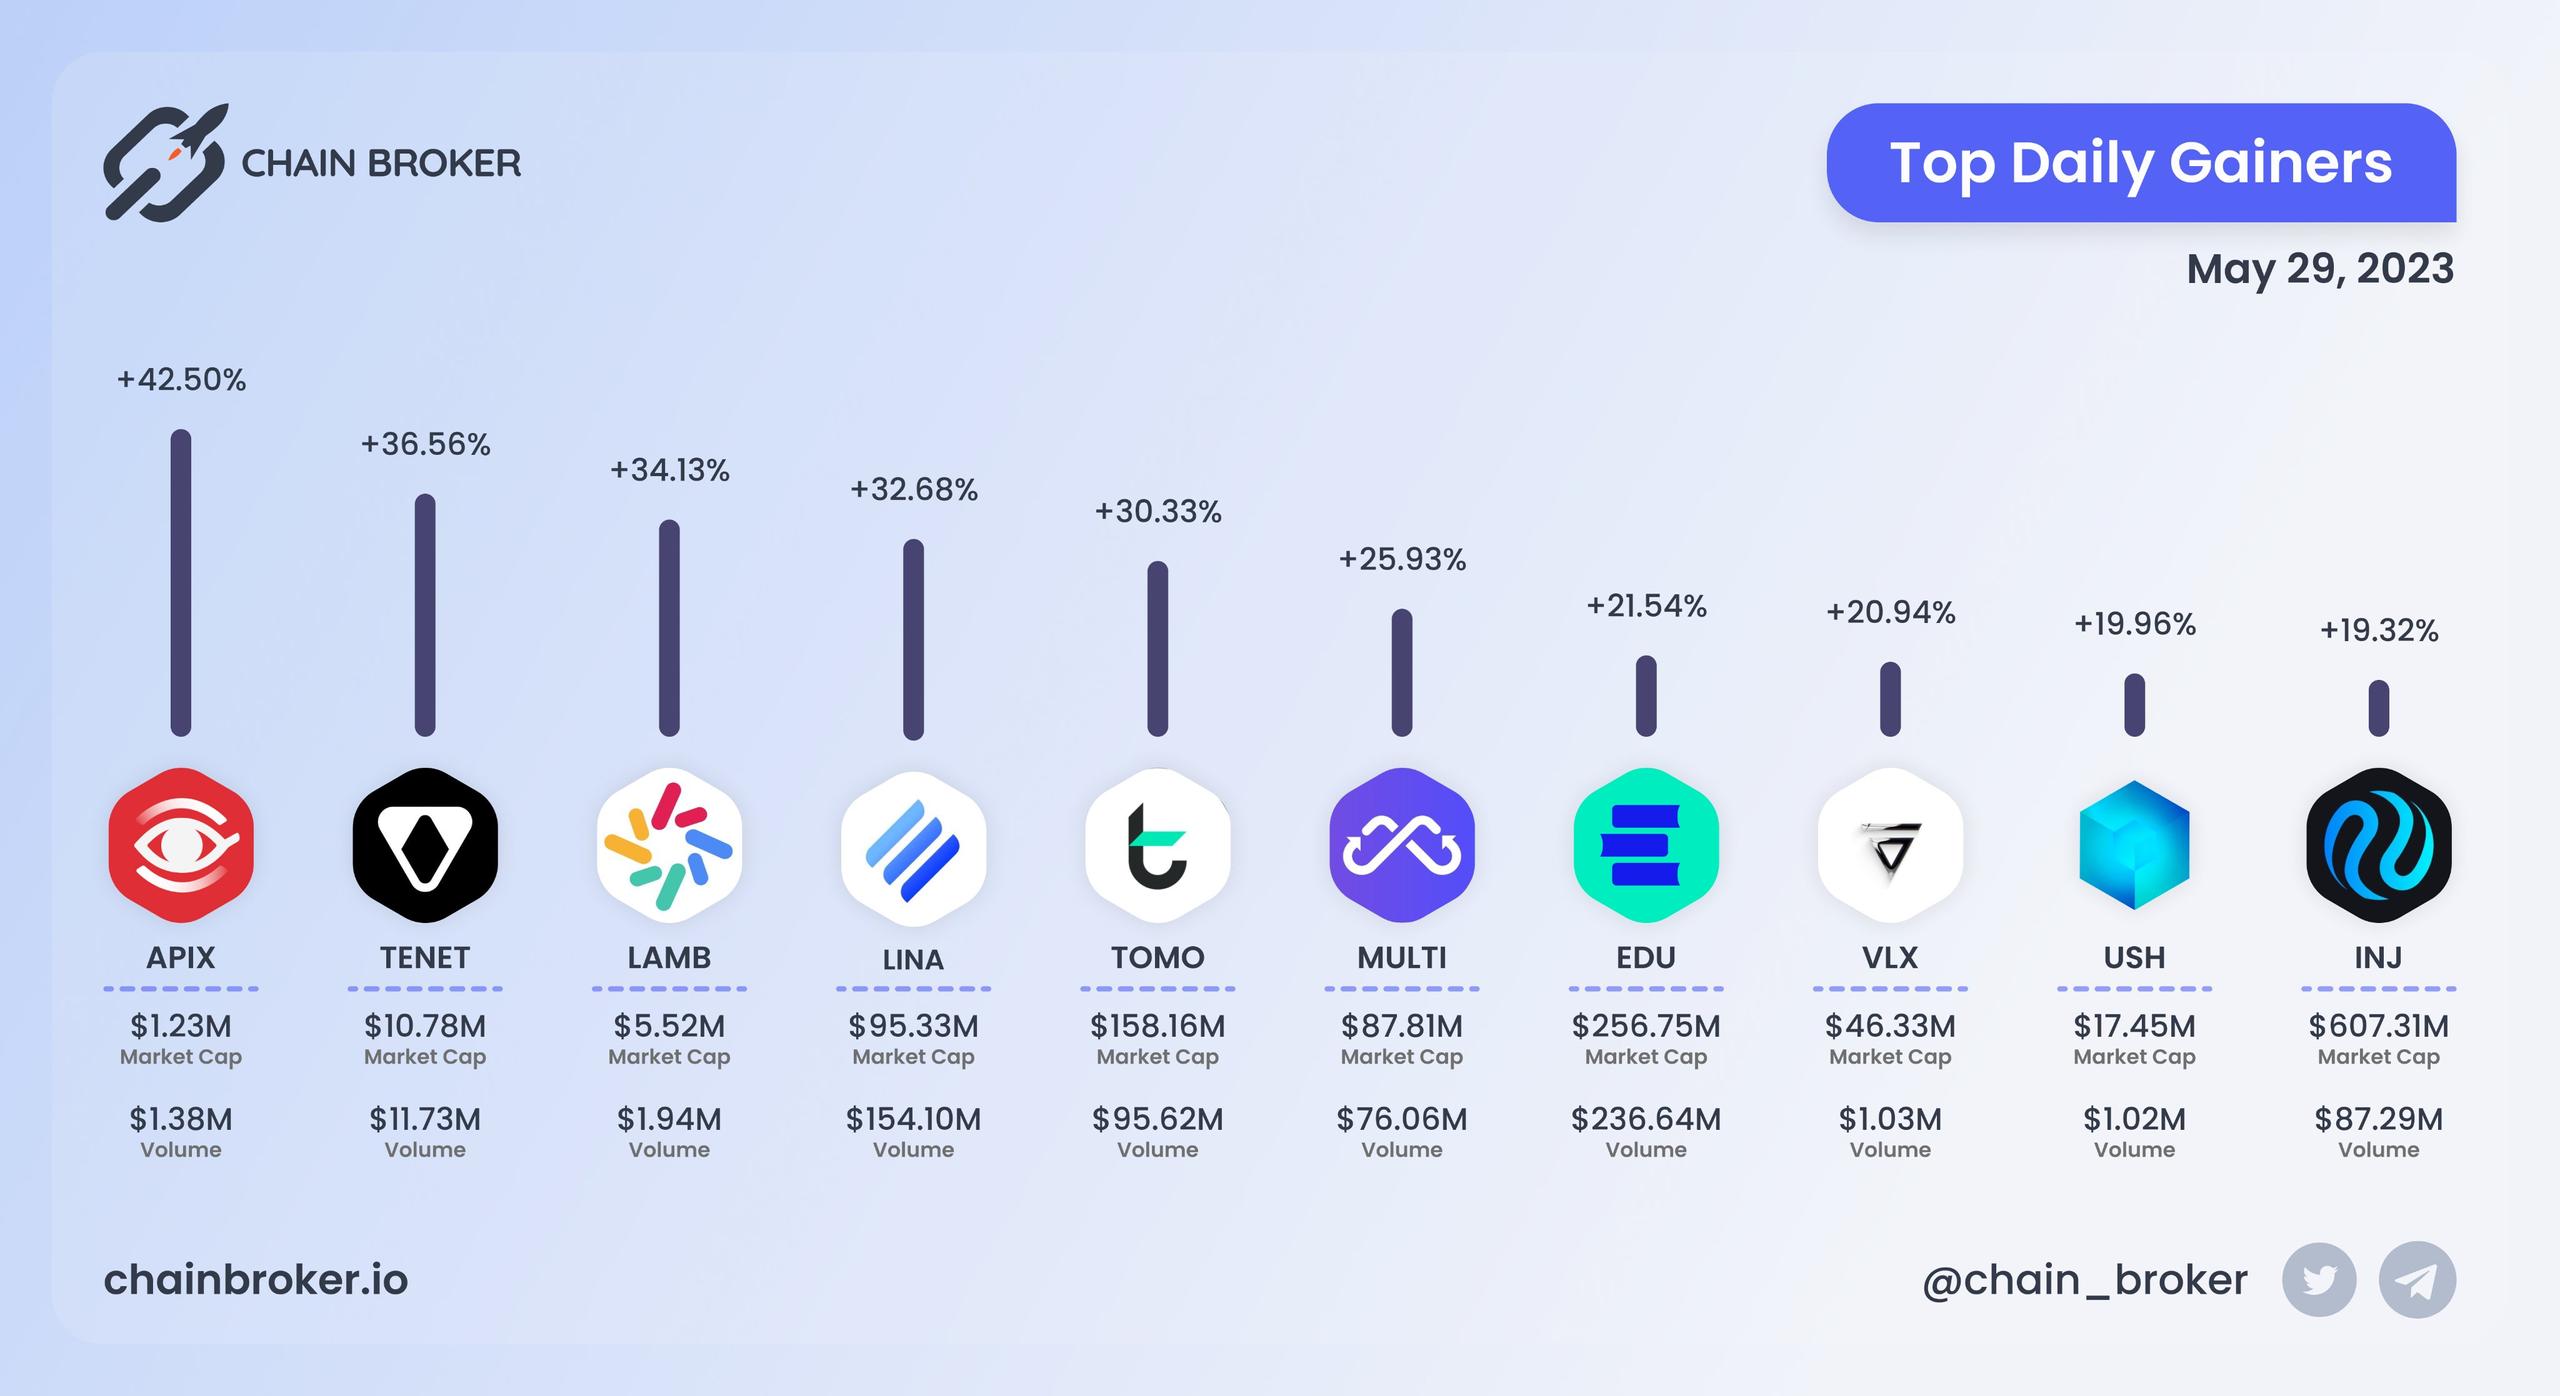 Top daily gainers